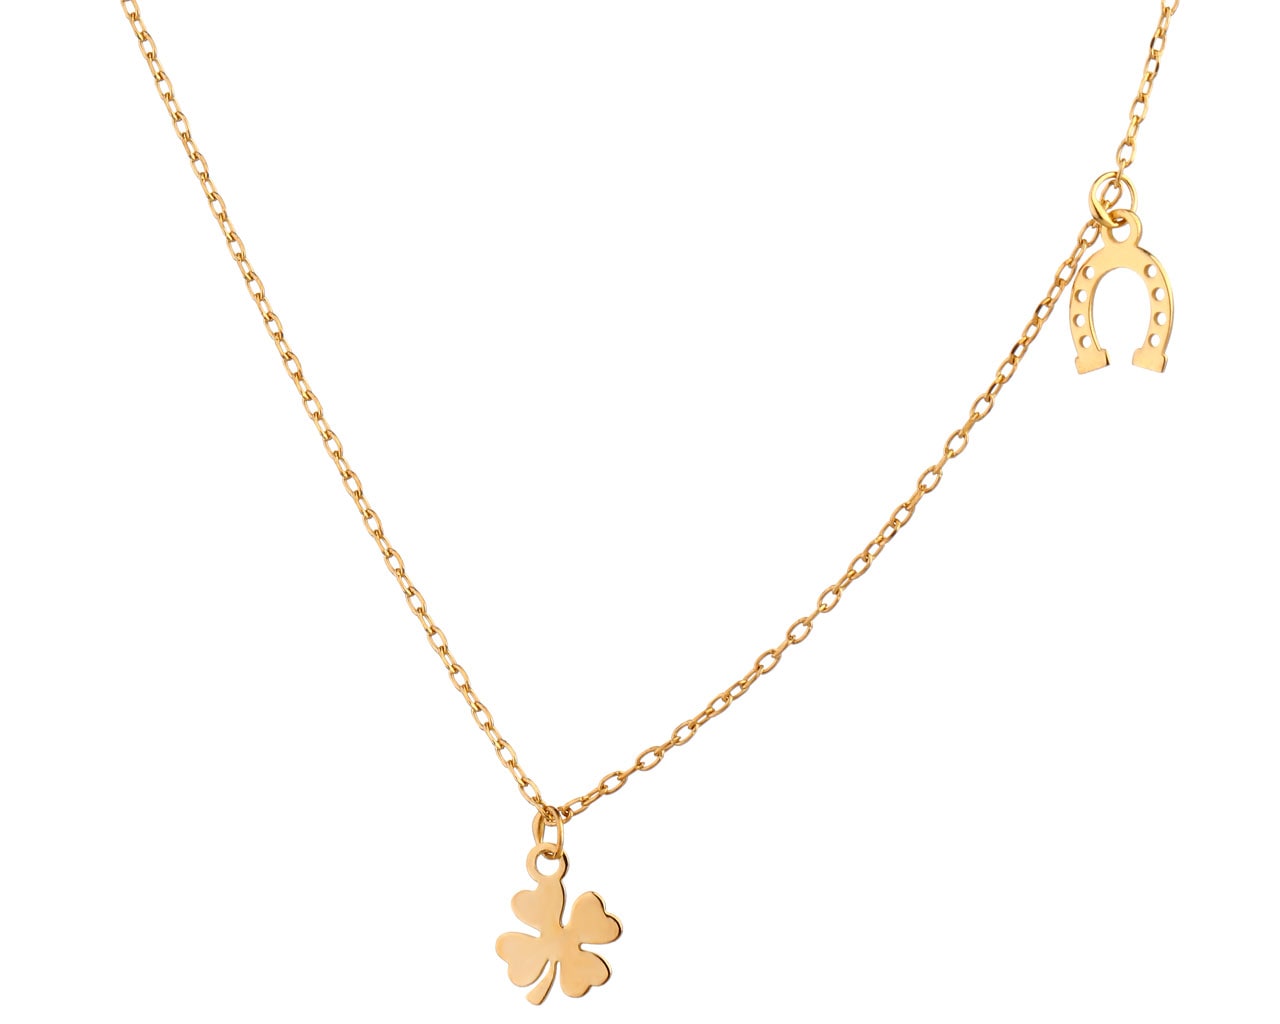 Gold Plated Silver Necklace - Clover, Horseshoe